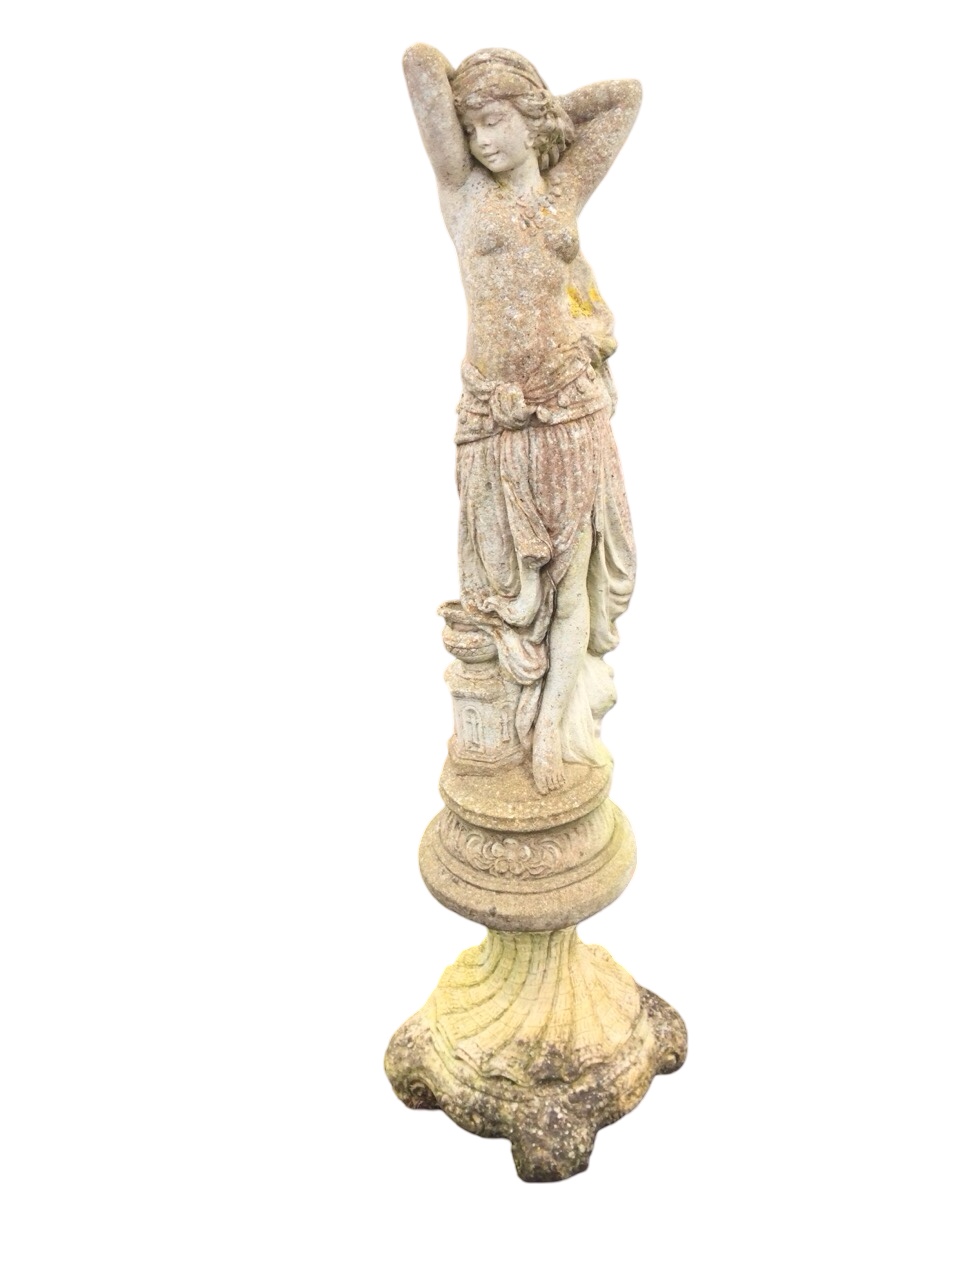 An art nouveau style composition stone garden statue of an elegant lady standing by urn on